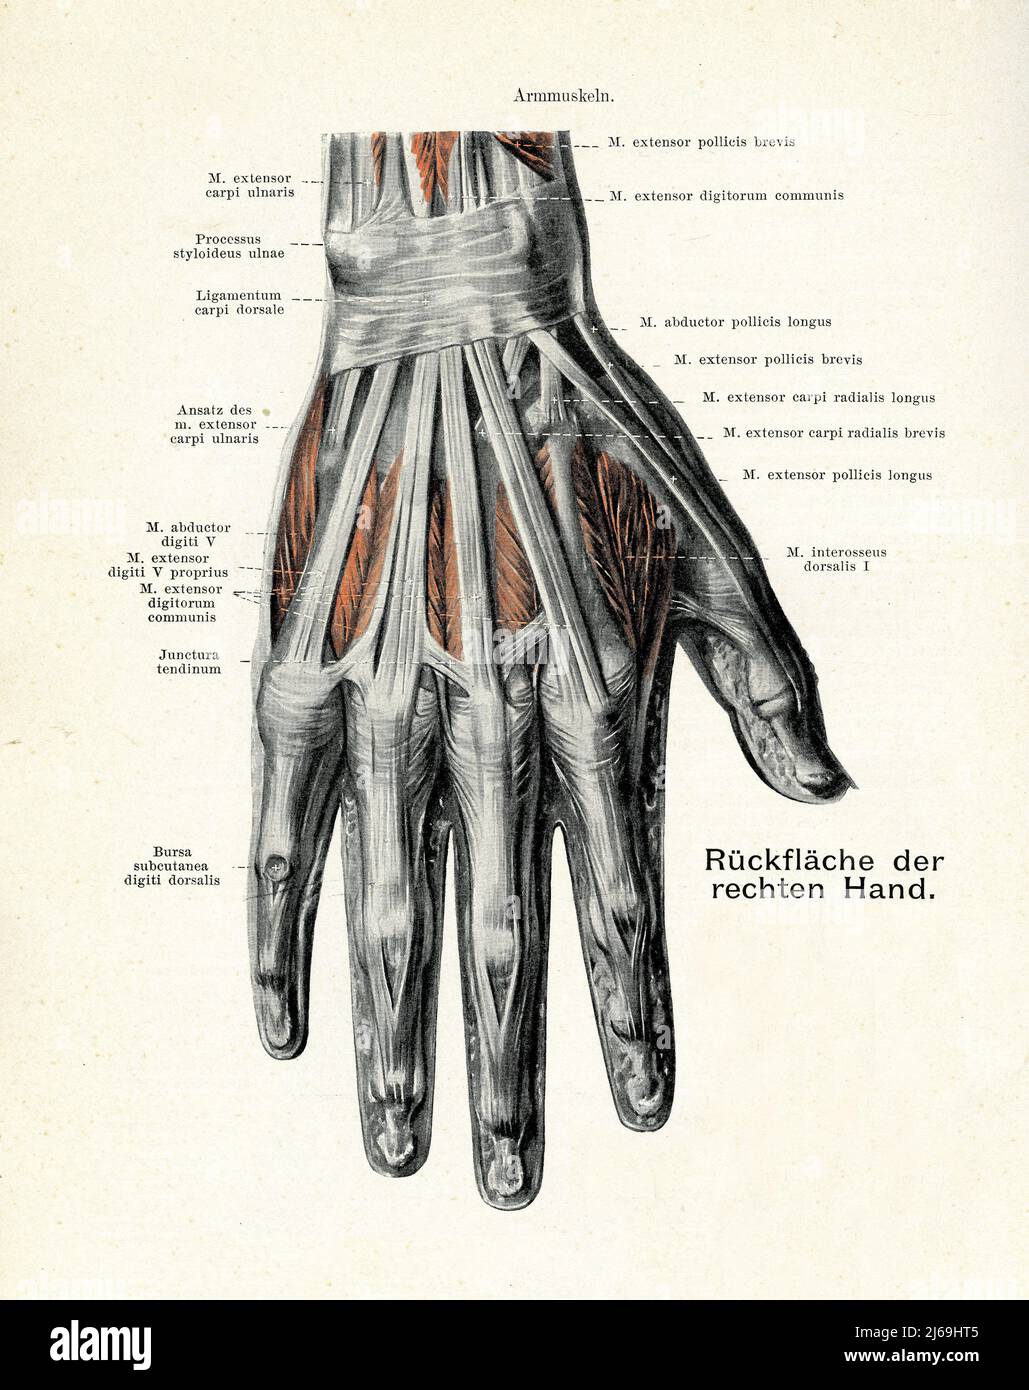 Vintage illustration of anatomy: dorsal musculature of the right hand, with German anatomical descriptions Stock Photo